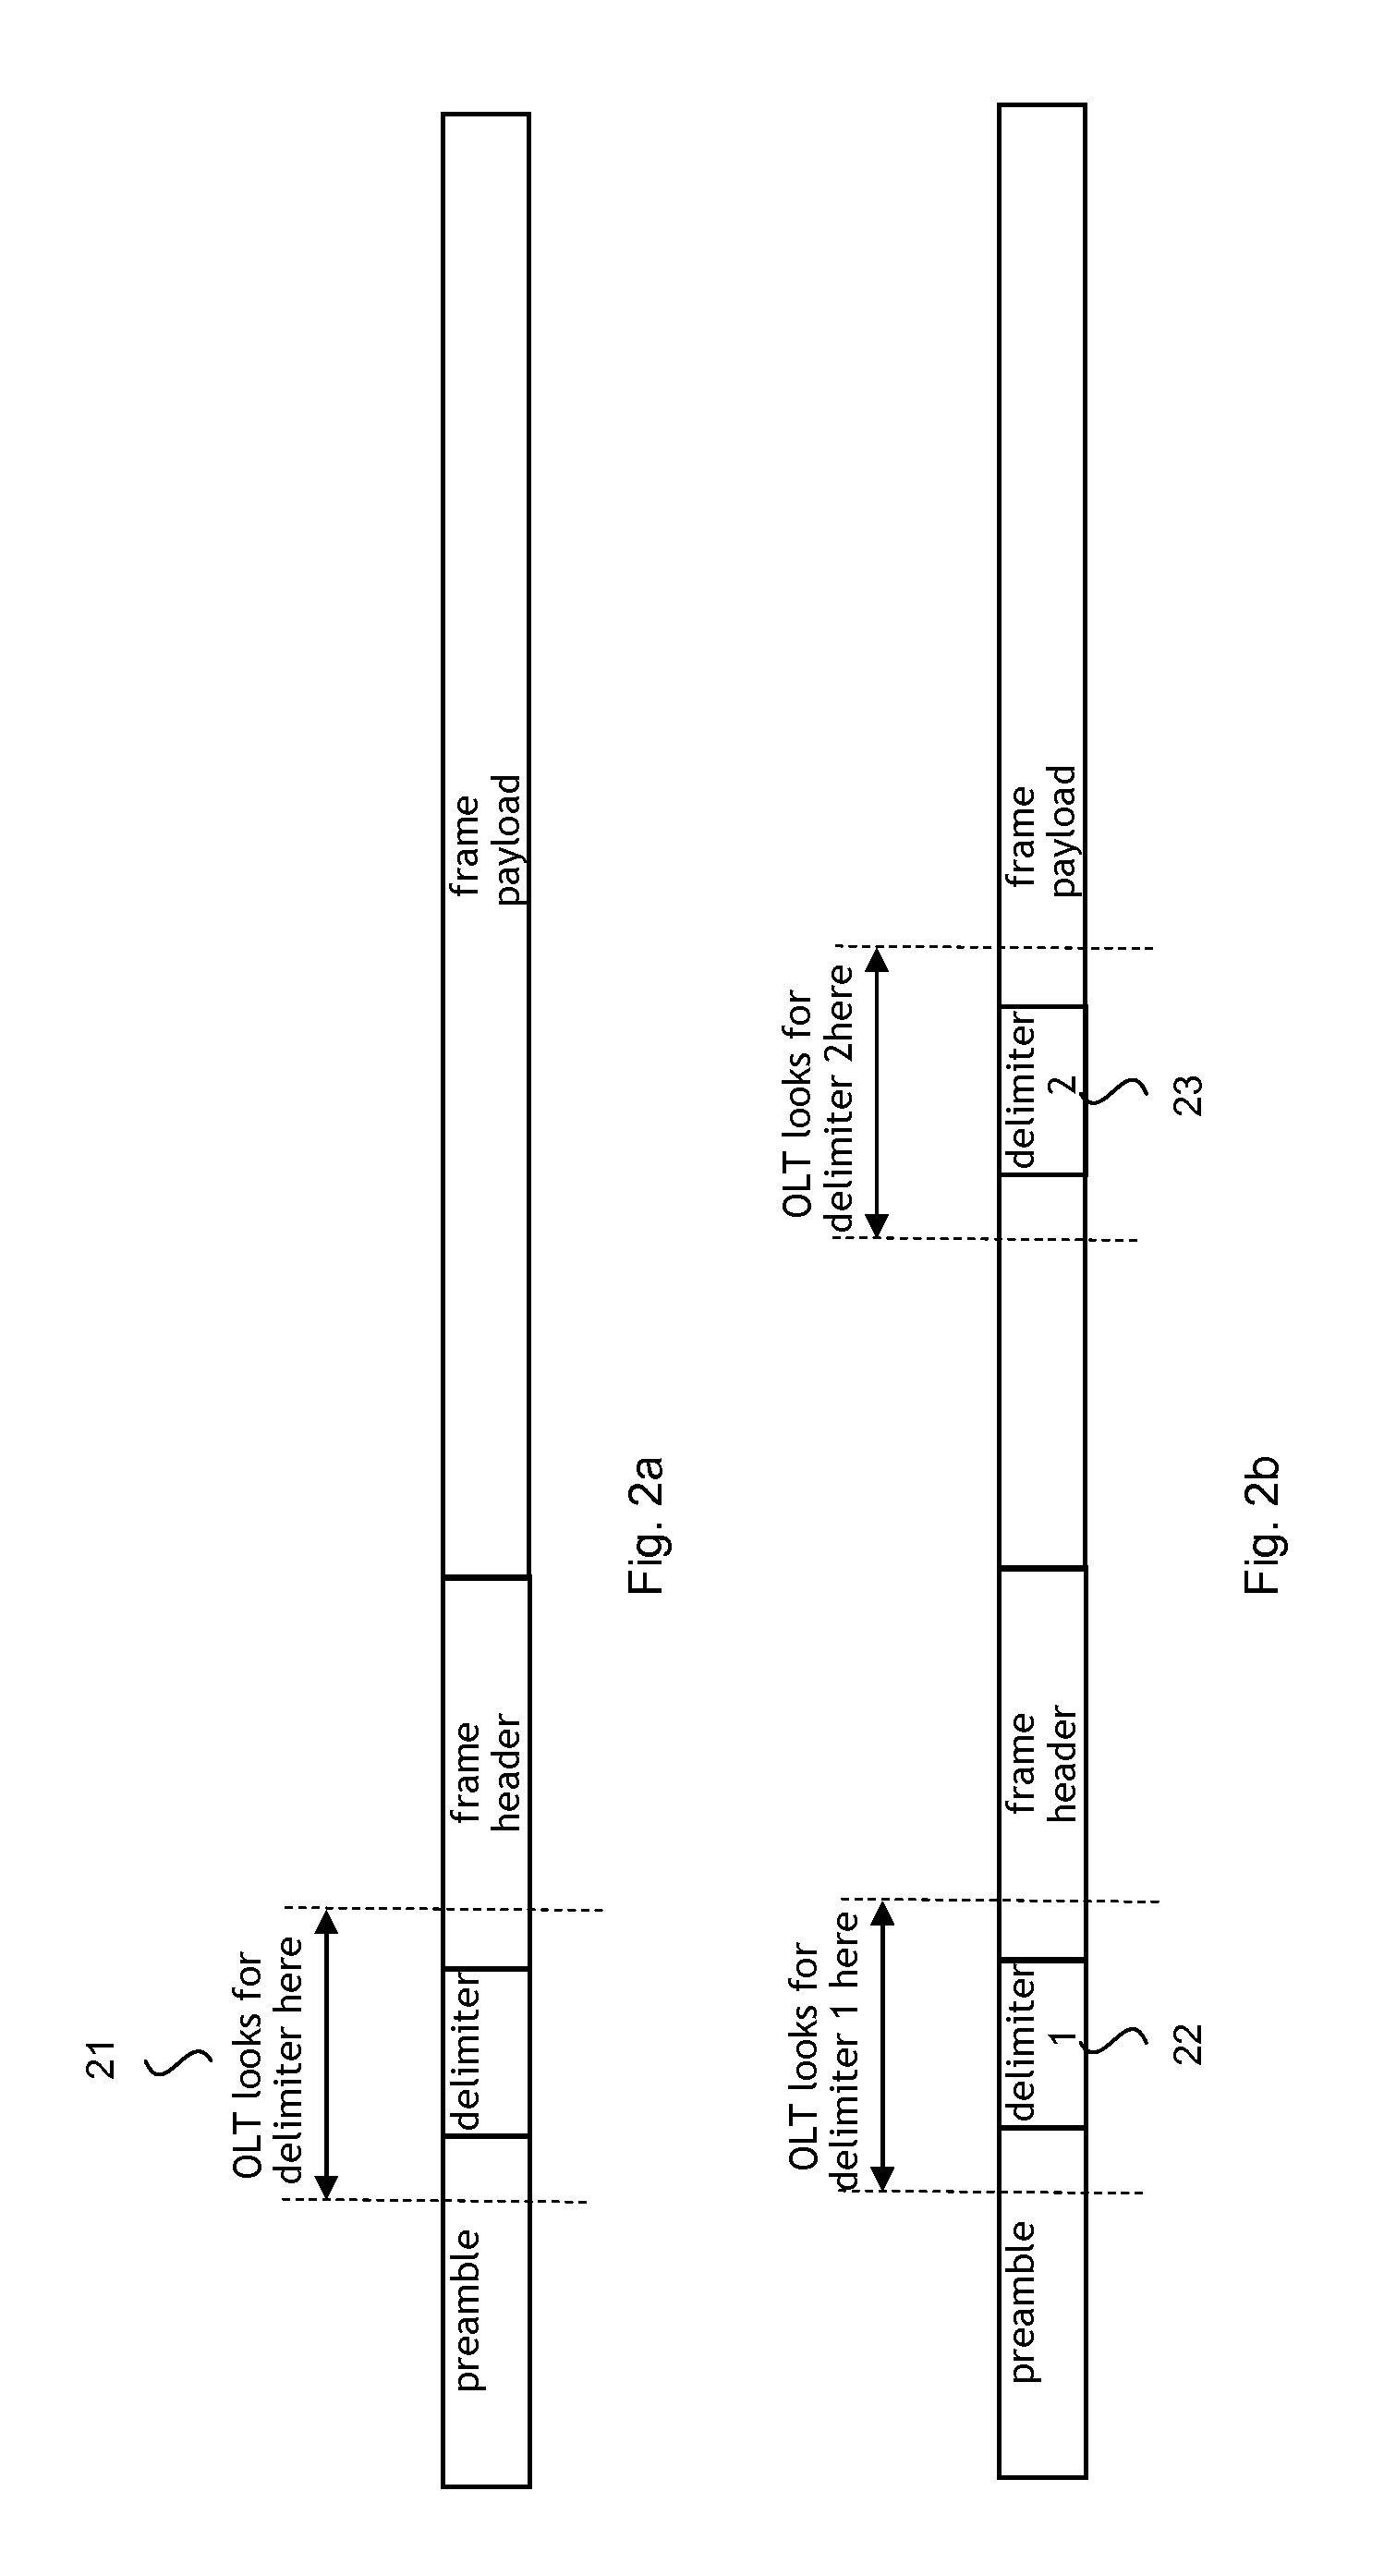 Method and apparatus for improved upstream frame synchronization in a passive optical network